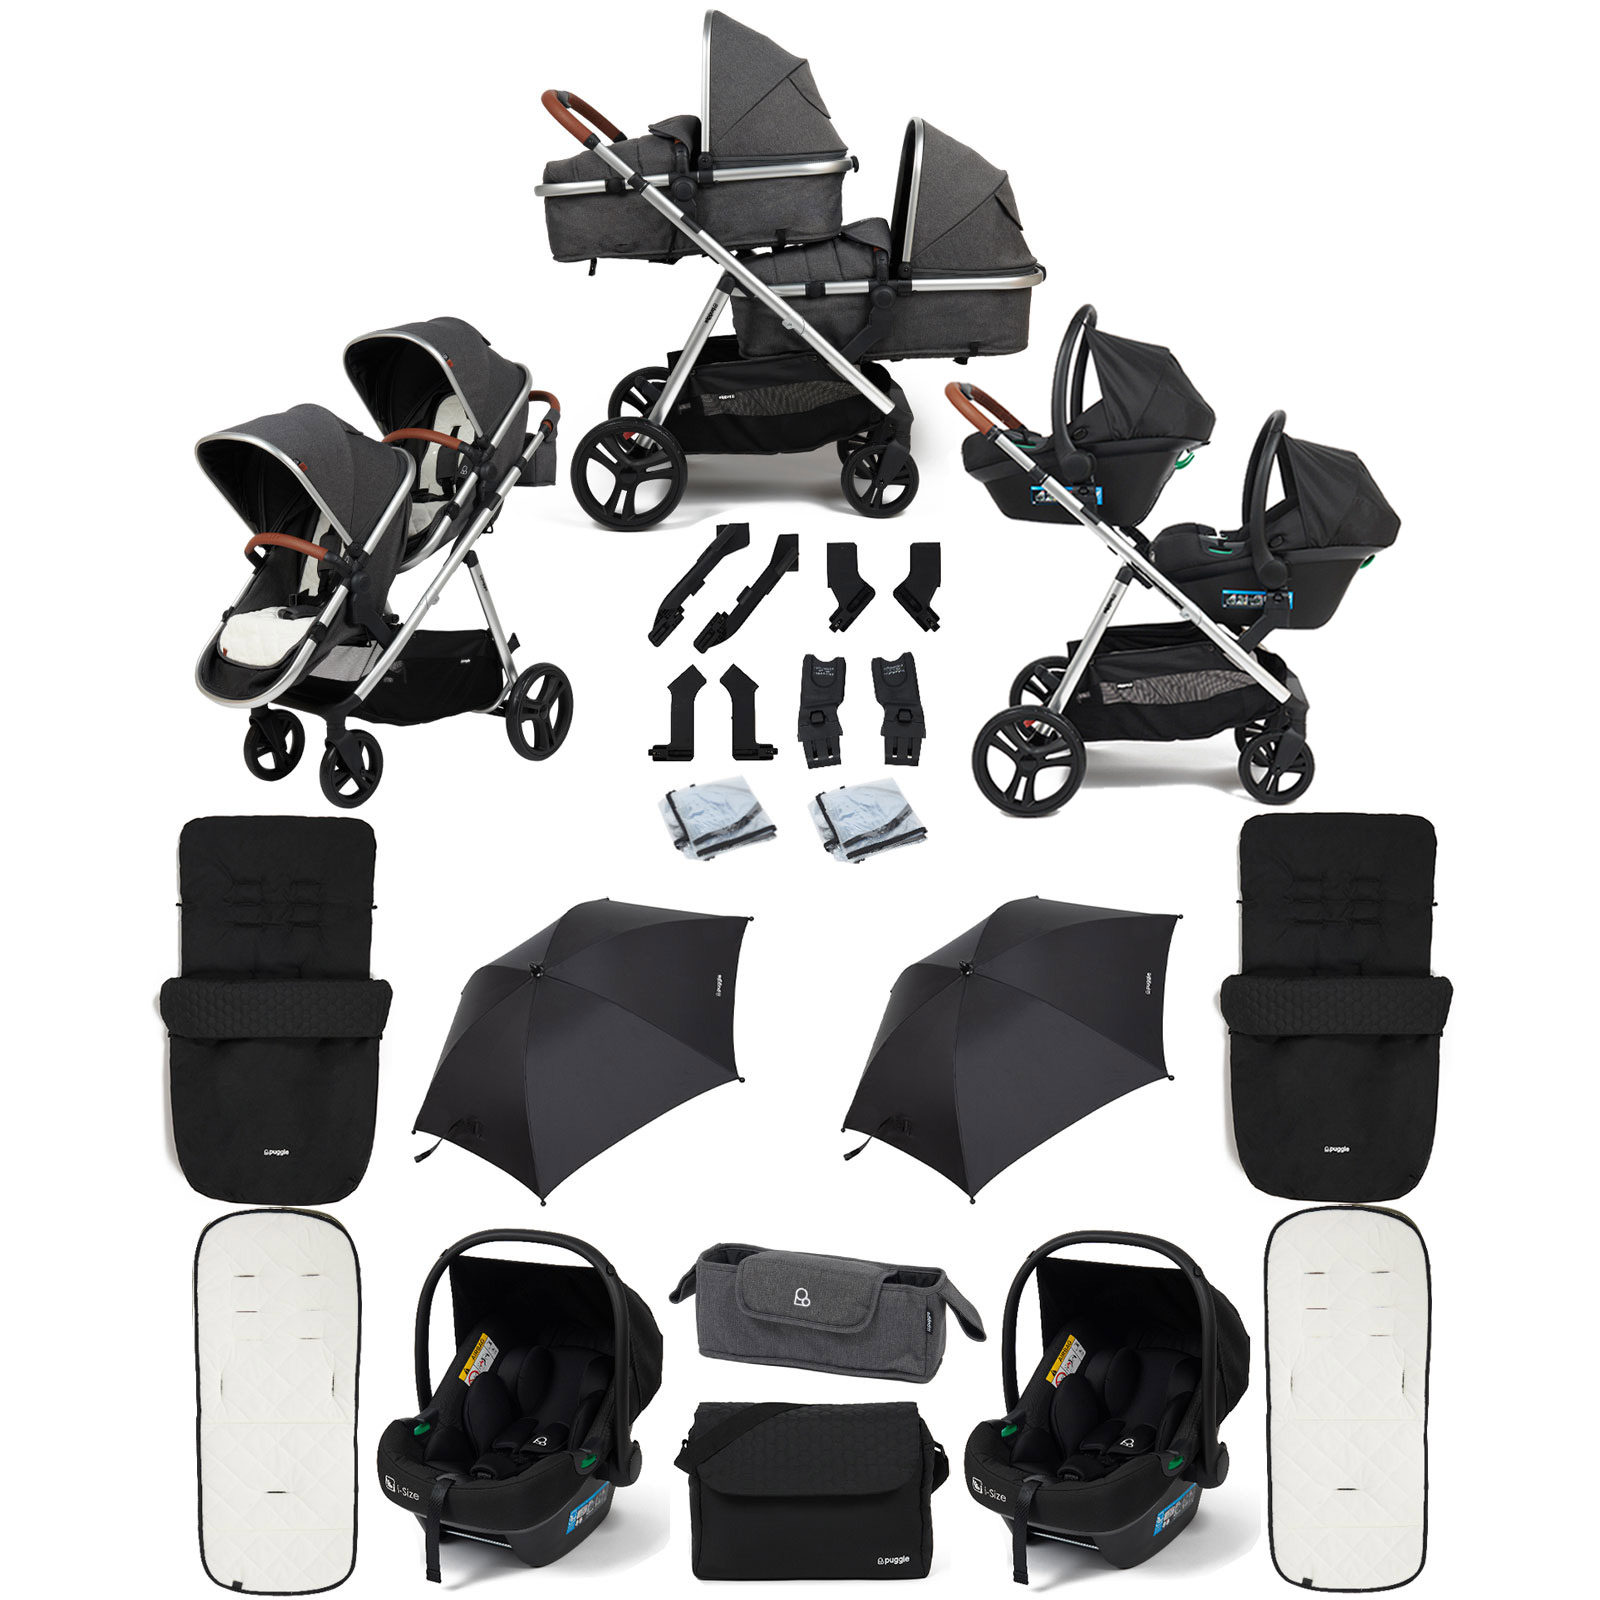 Puggle Memphis 2-in-1 Duo Double Travel System with 2 i-Size Car Seats, 2 Footmuffs, 2 Parasols, and Changing Bag - Platinum Grey